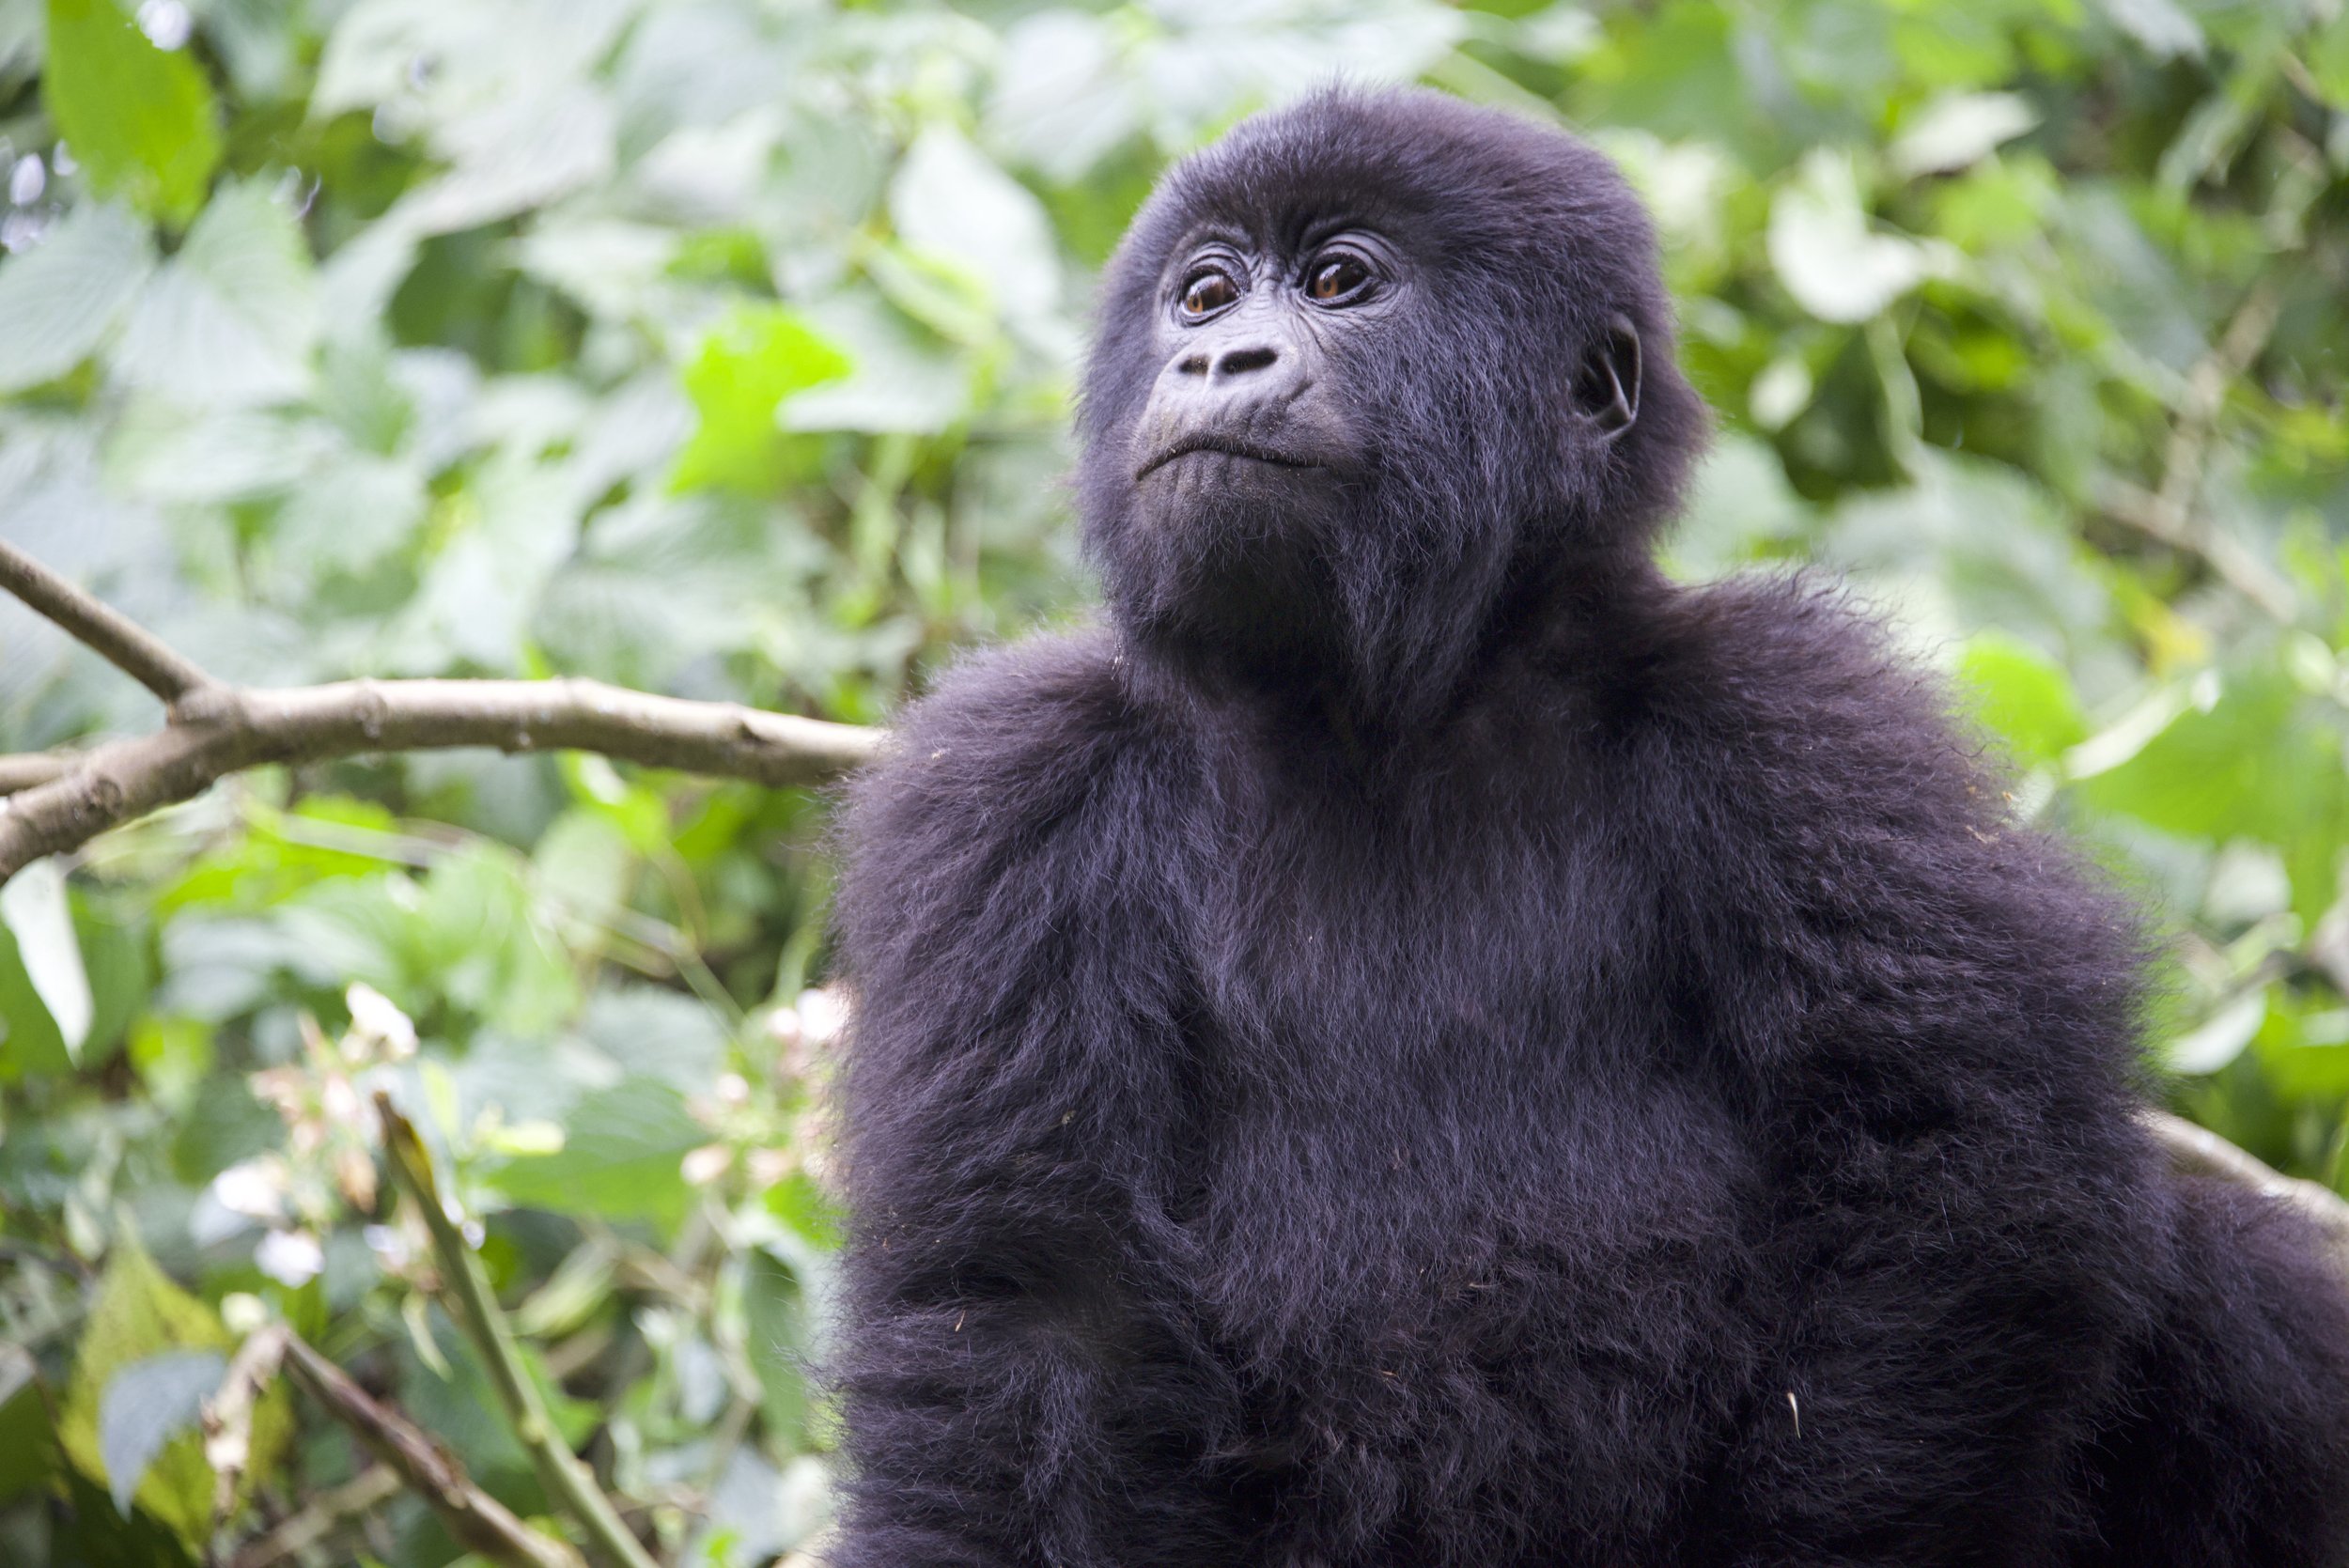  An infant gorilla sitting on a tree branch looking over. Photo courtesy of Caitlin Starowicz. 